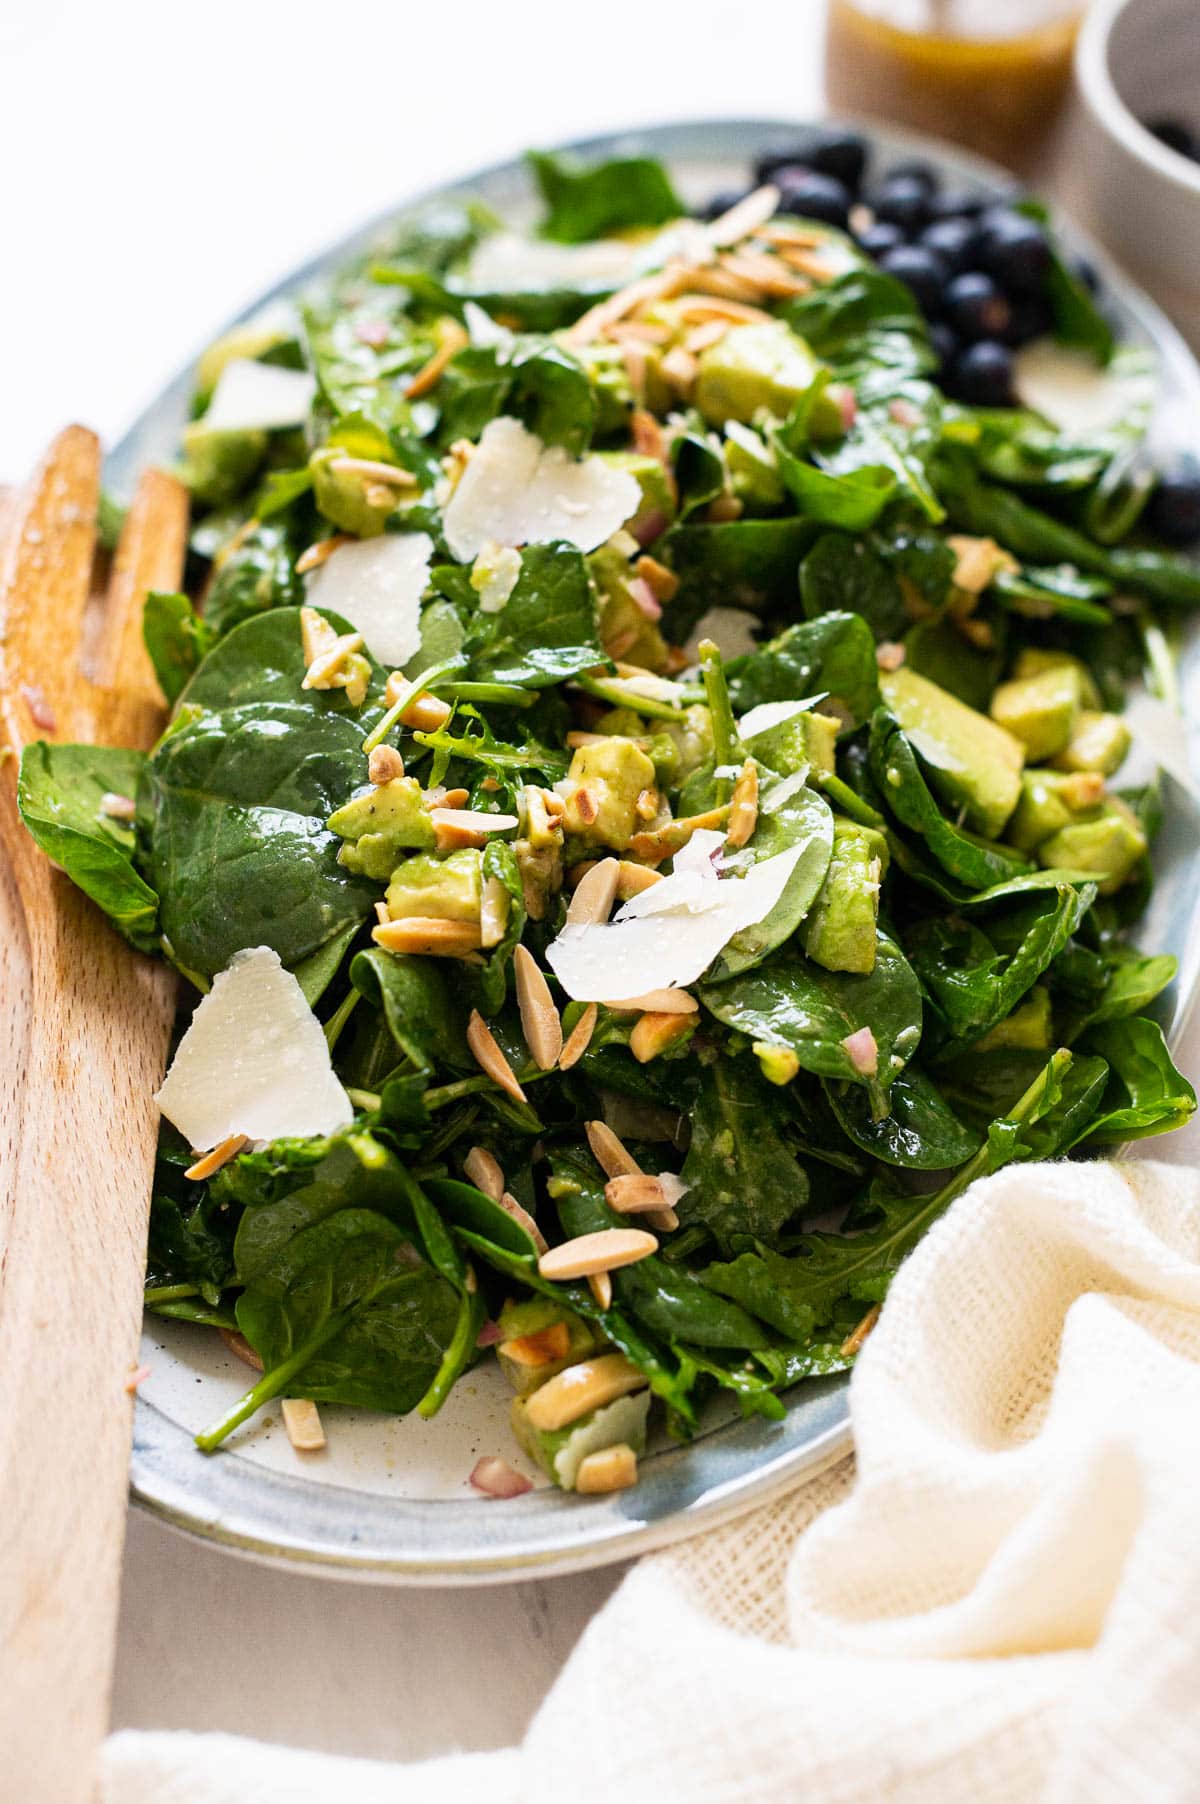 Spinach salad with avocado, almonds, parmesan cheese on a serving platter with wooden tongs.